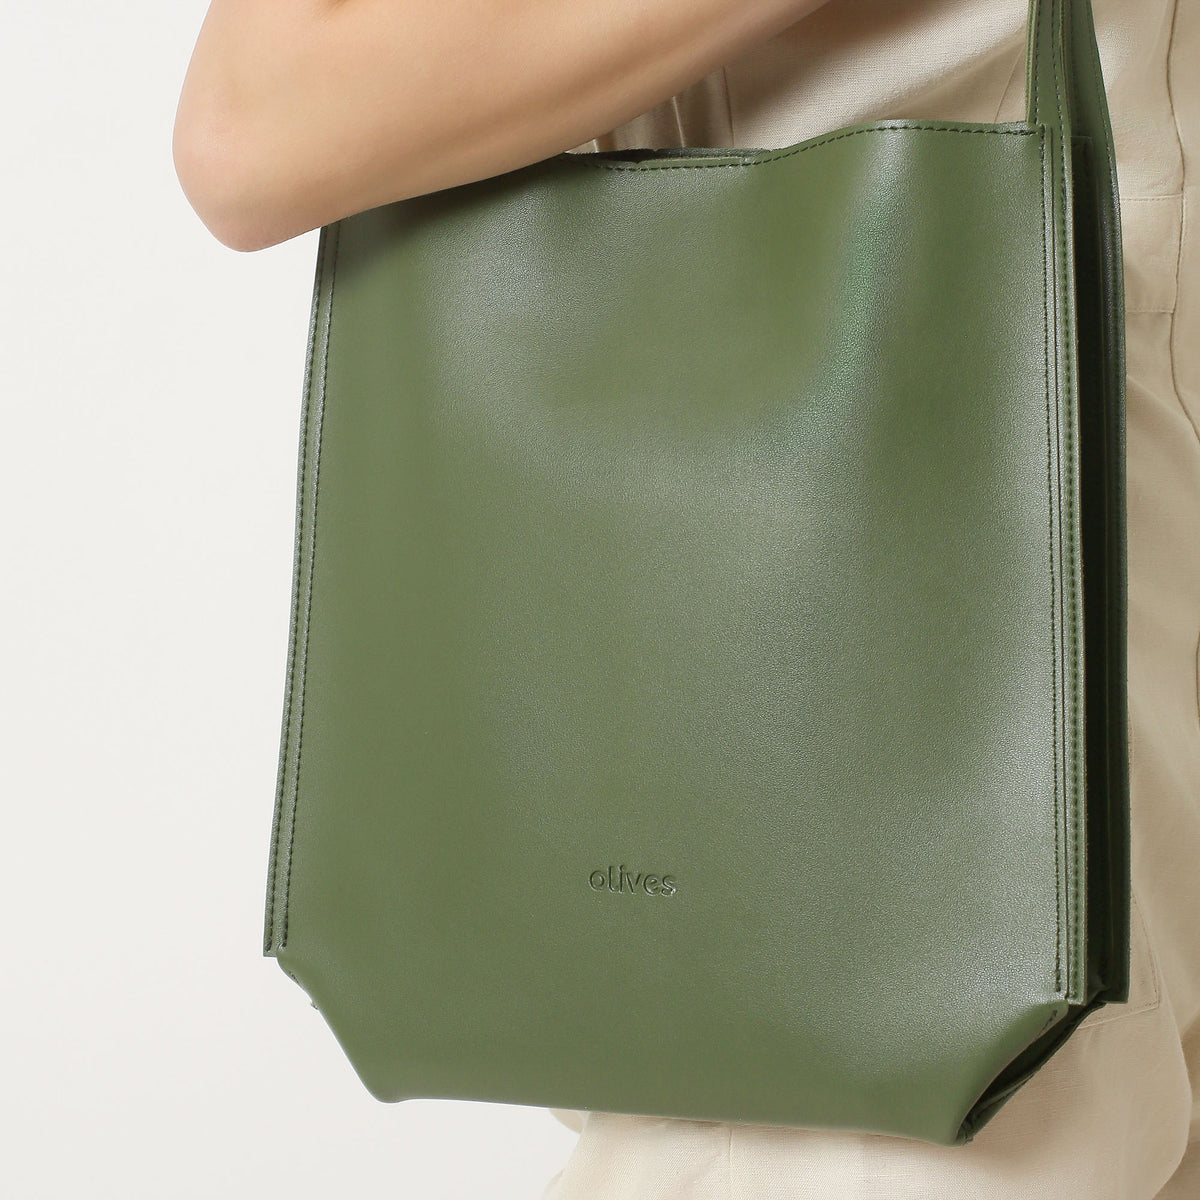 Olive green canvas and fawn leather suit case